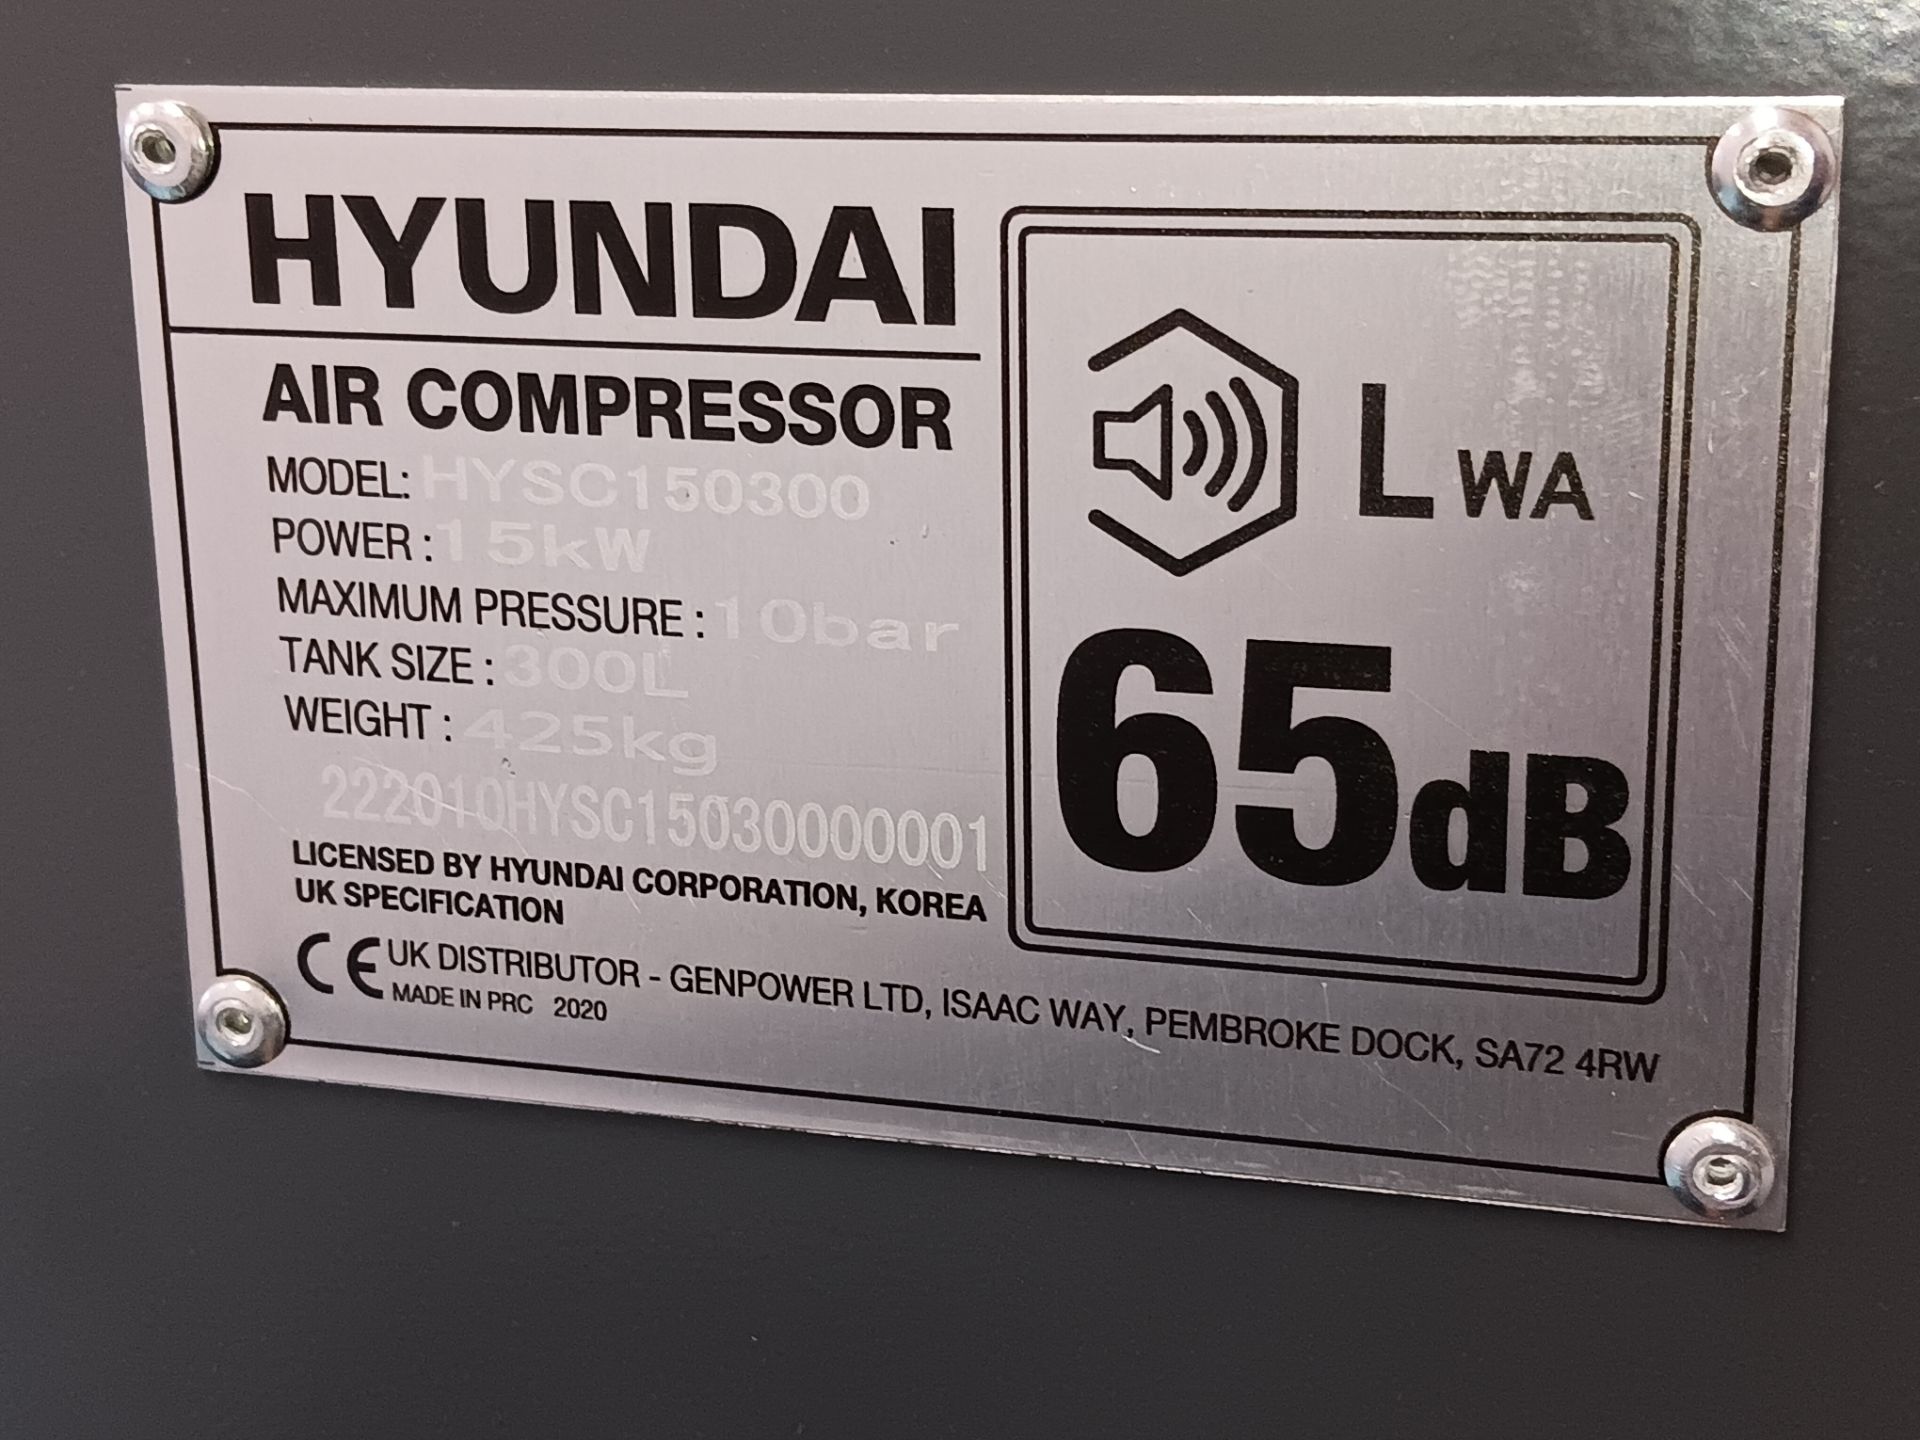 Hyundai HYSC150300 15hp 300litre screw compressor (2020) Serial number 222010, 90 hours recorded - Image 7 of 9